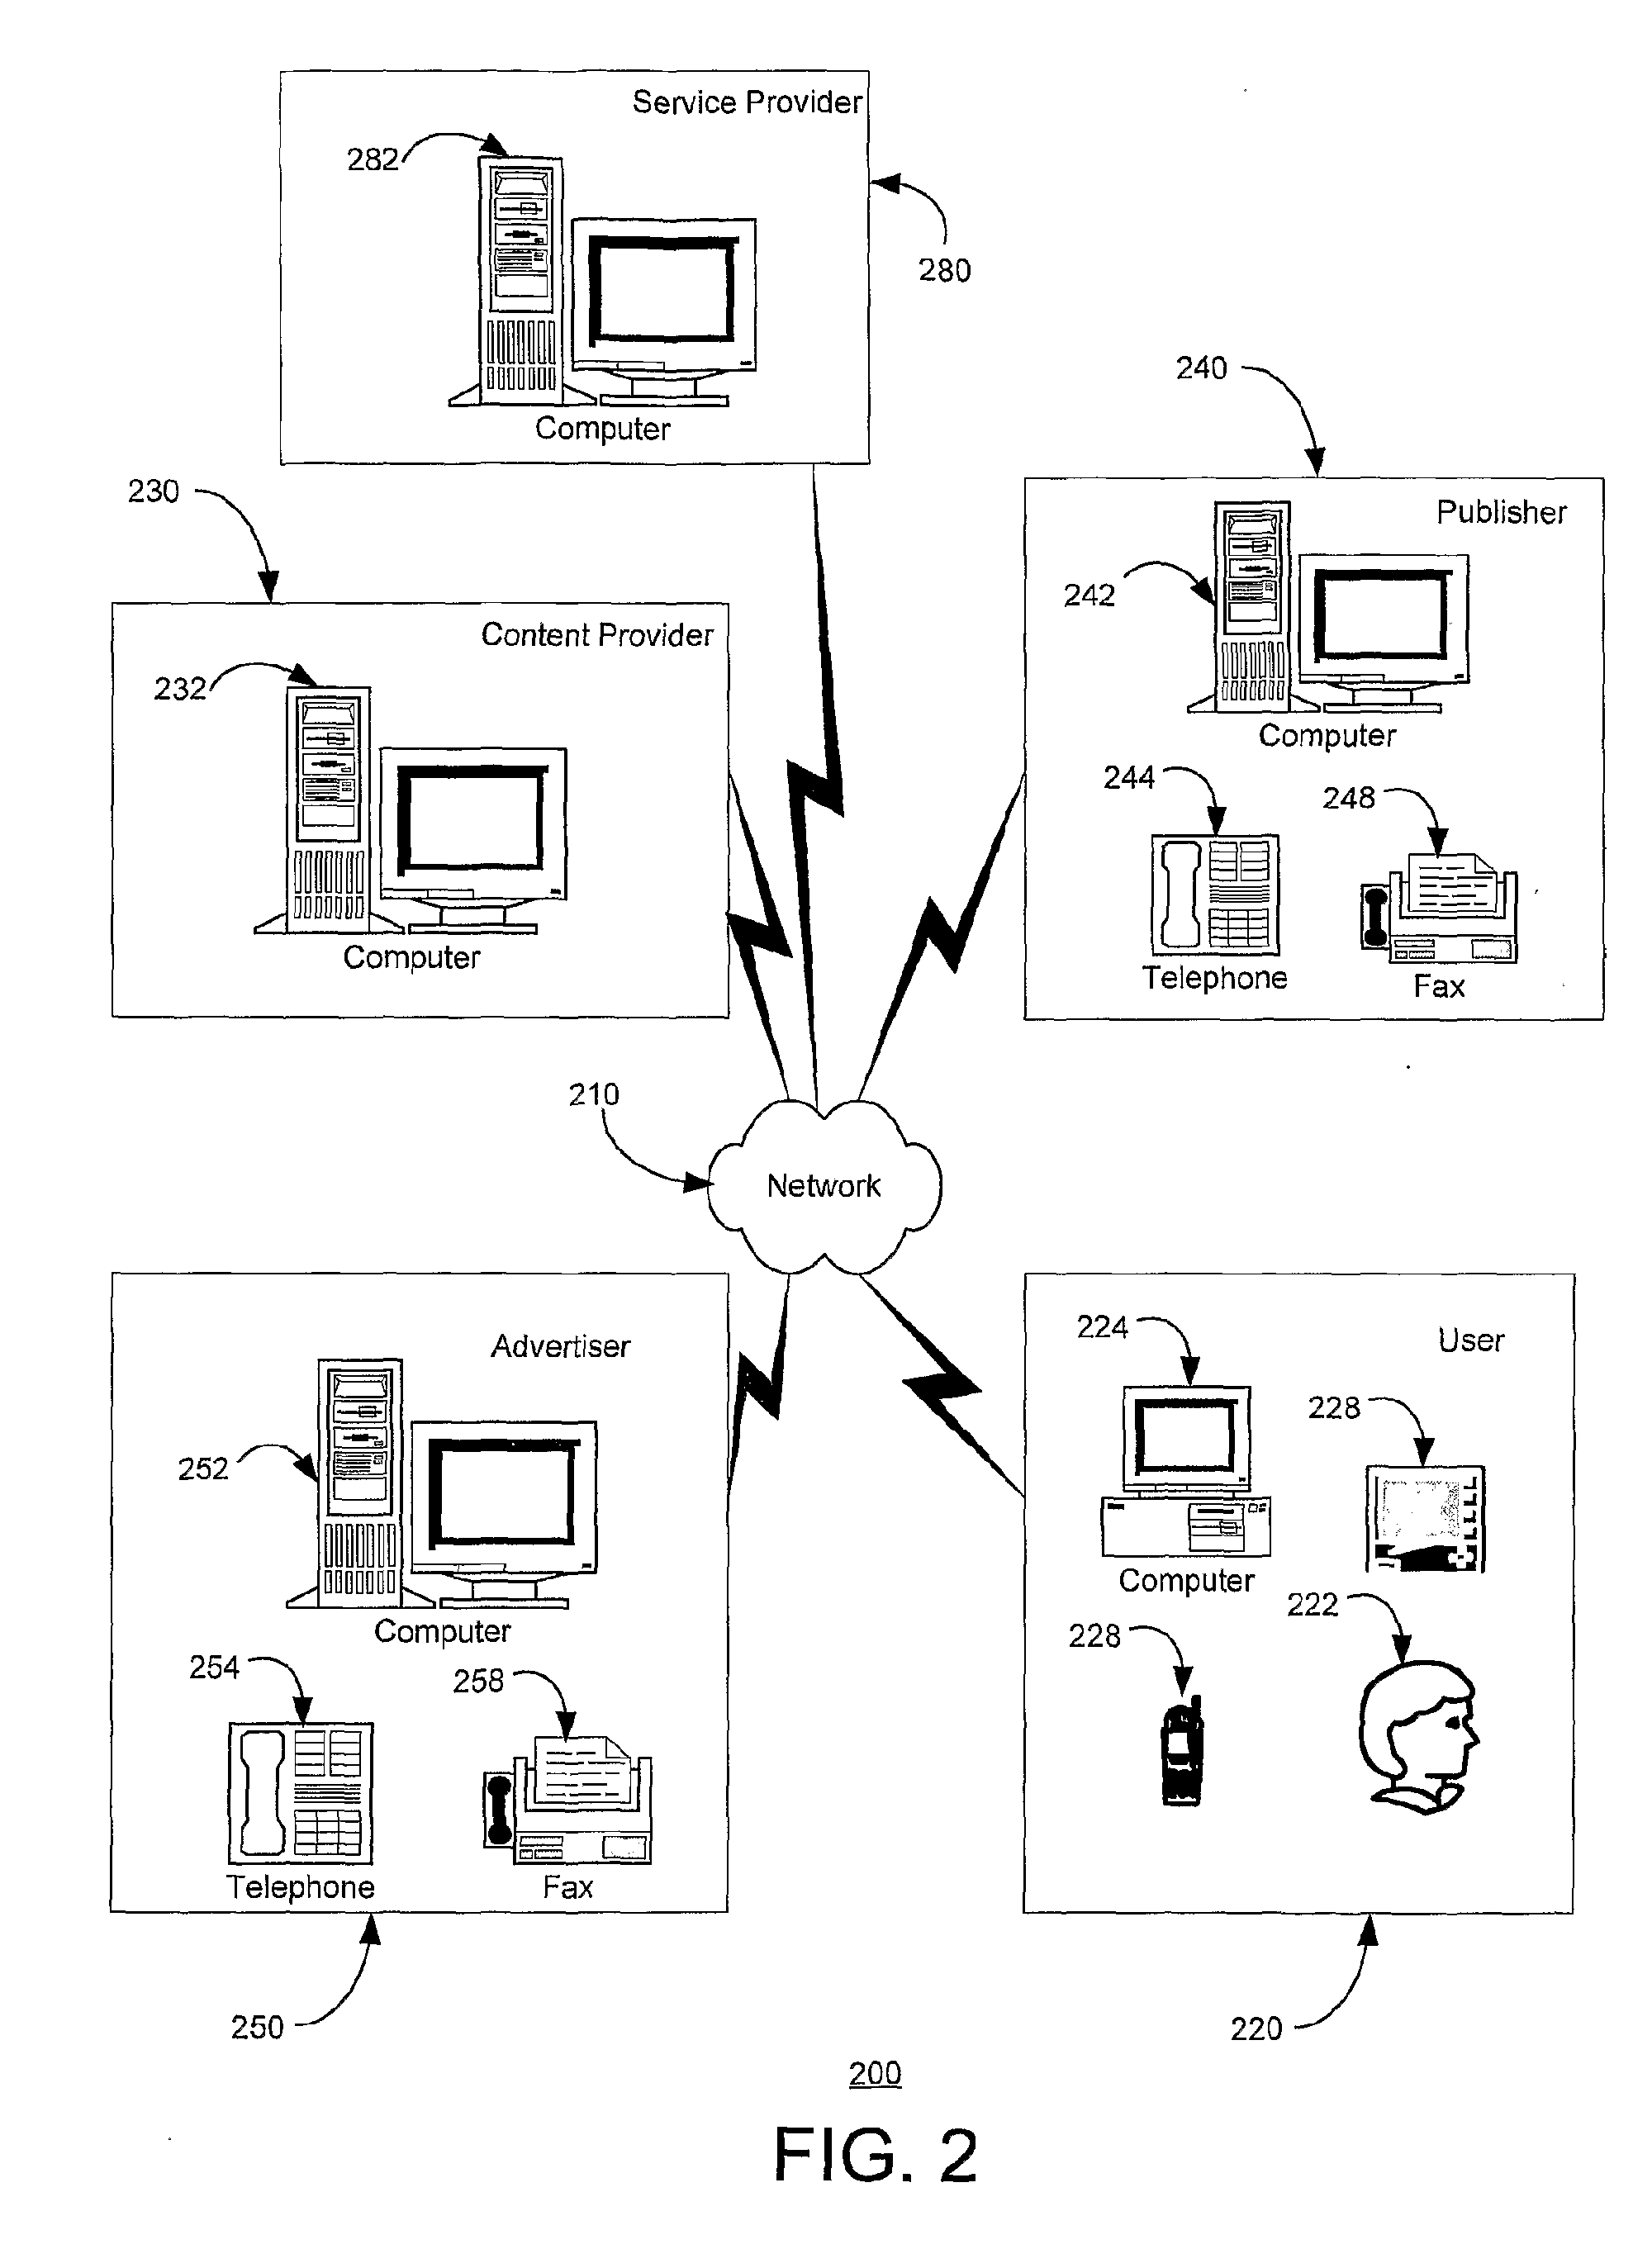 Method and System for the Creating, Managing, and Delivery of Enhanced Feed Formatted Content